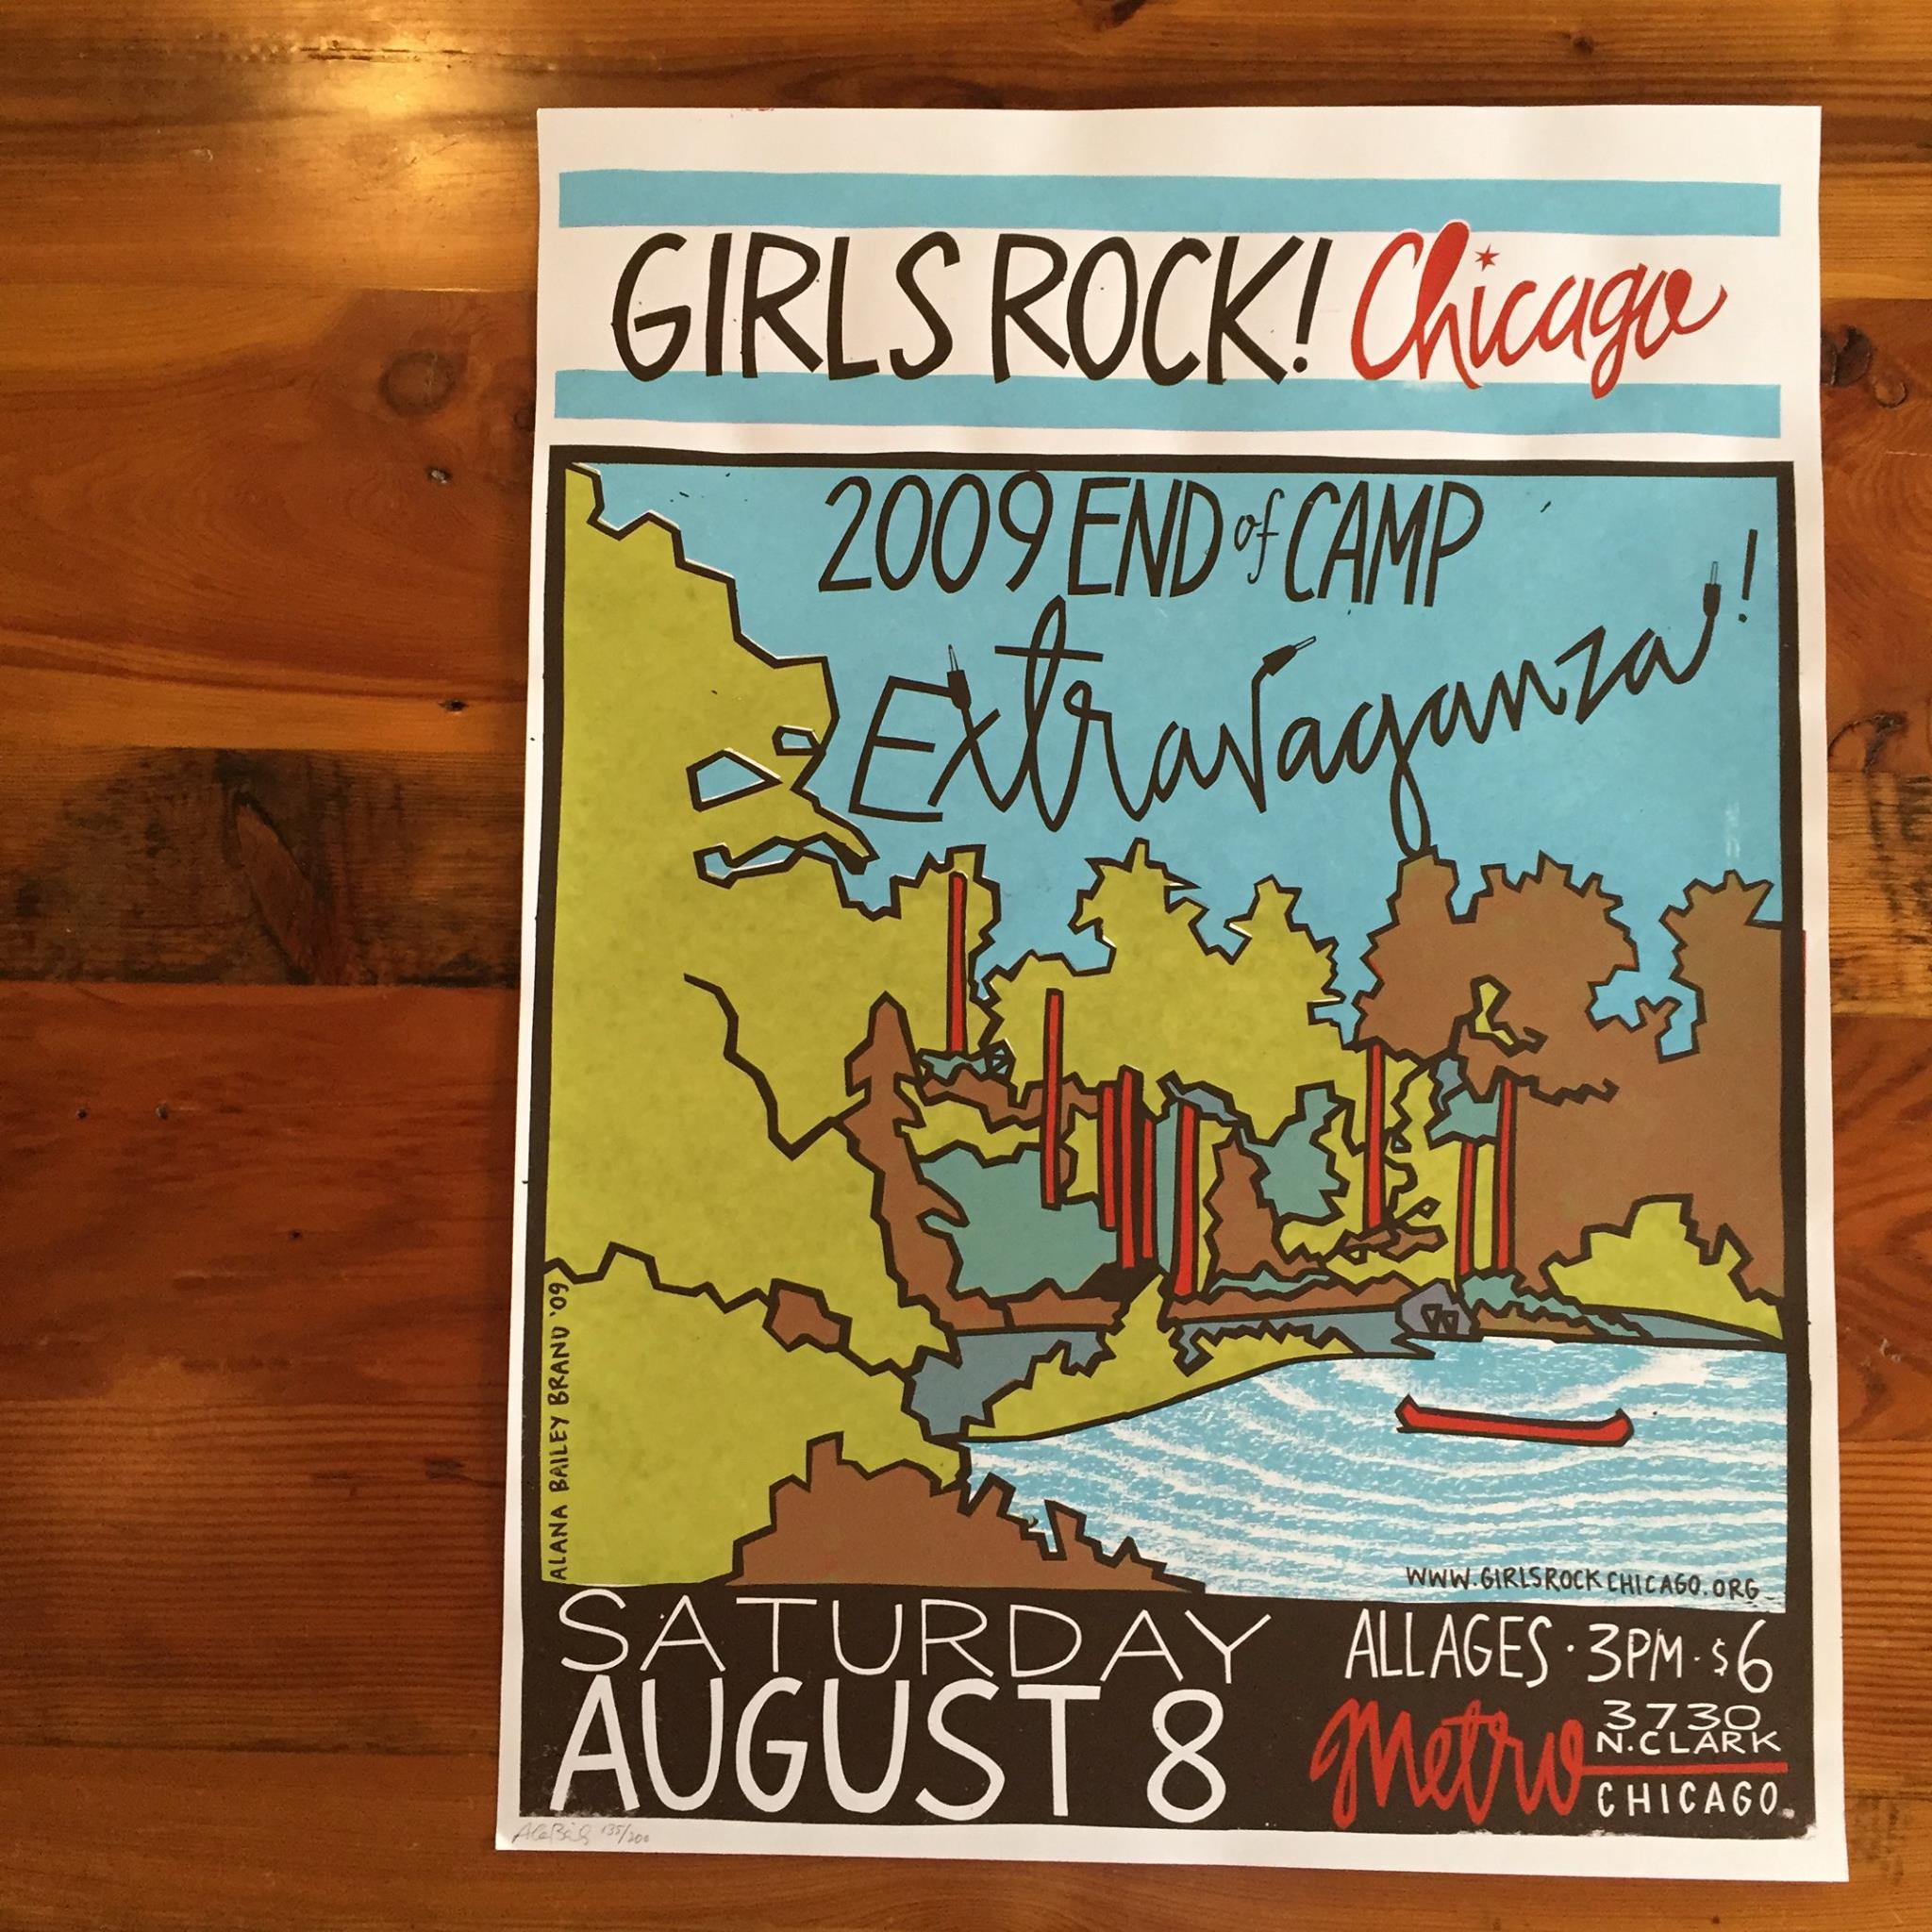 2009 Camp Poster by Alana Bailey